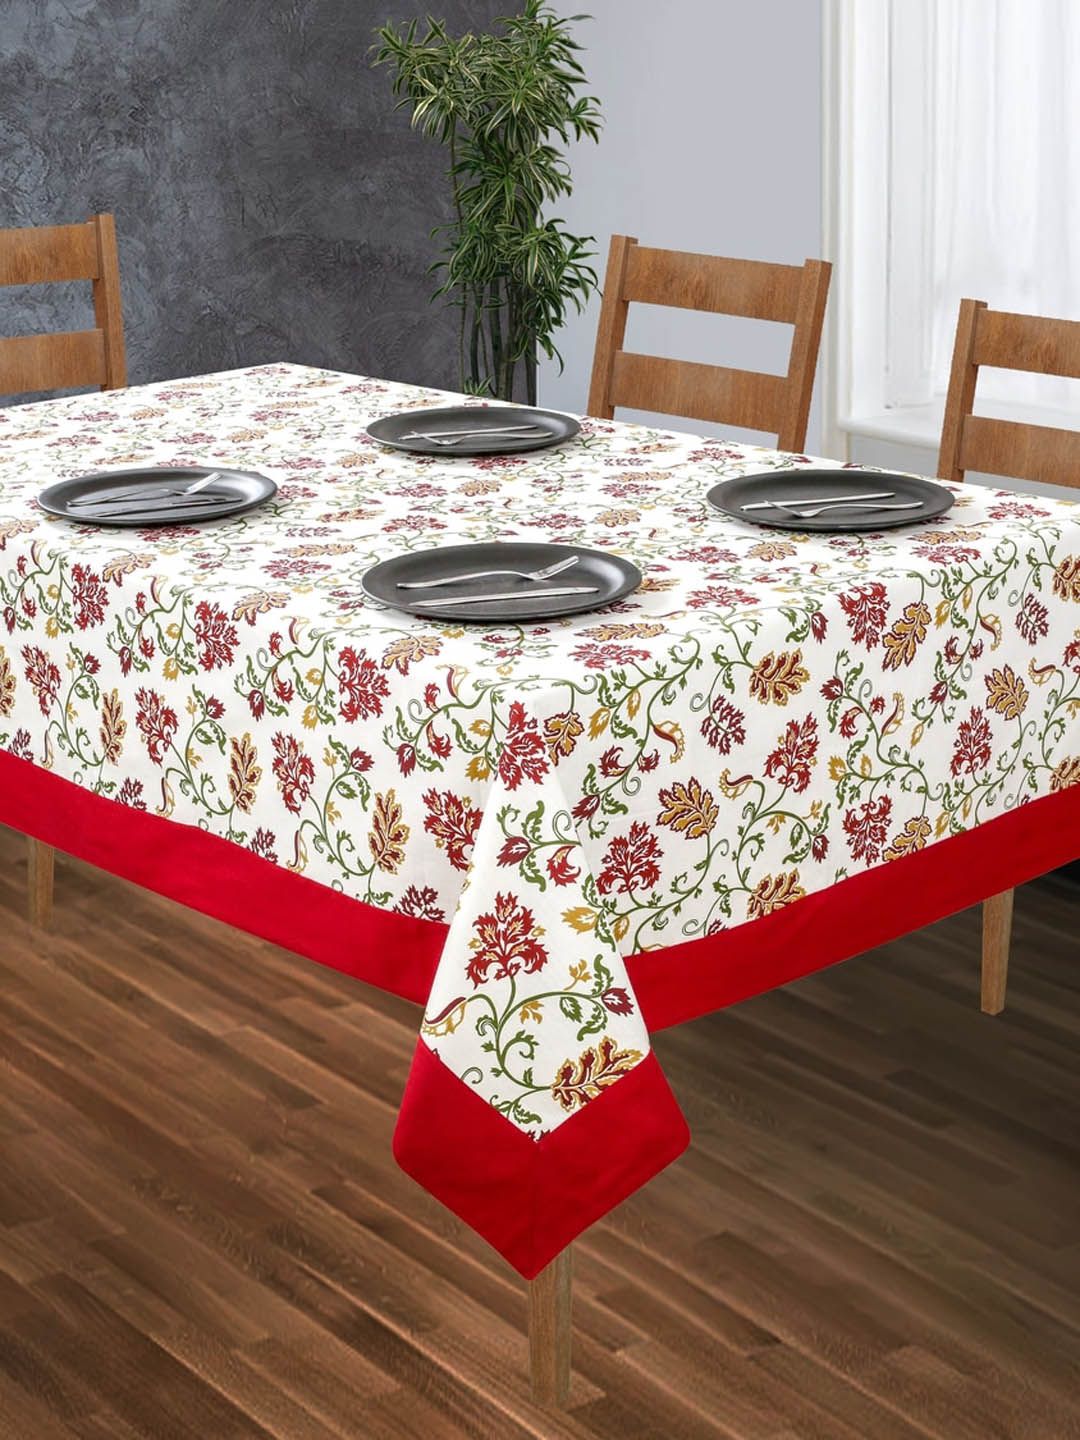 SHADES of LIFE Red & White Printed Cotton 2-Seater Table Cover Price in India